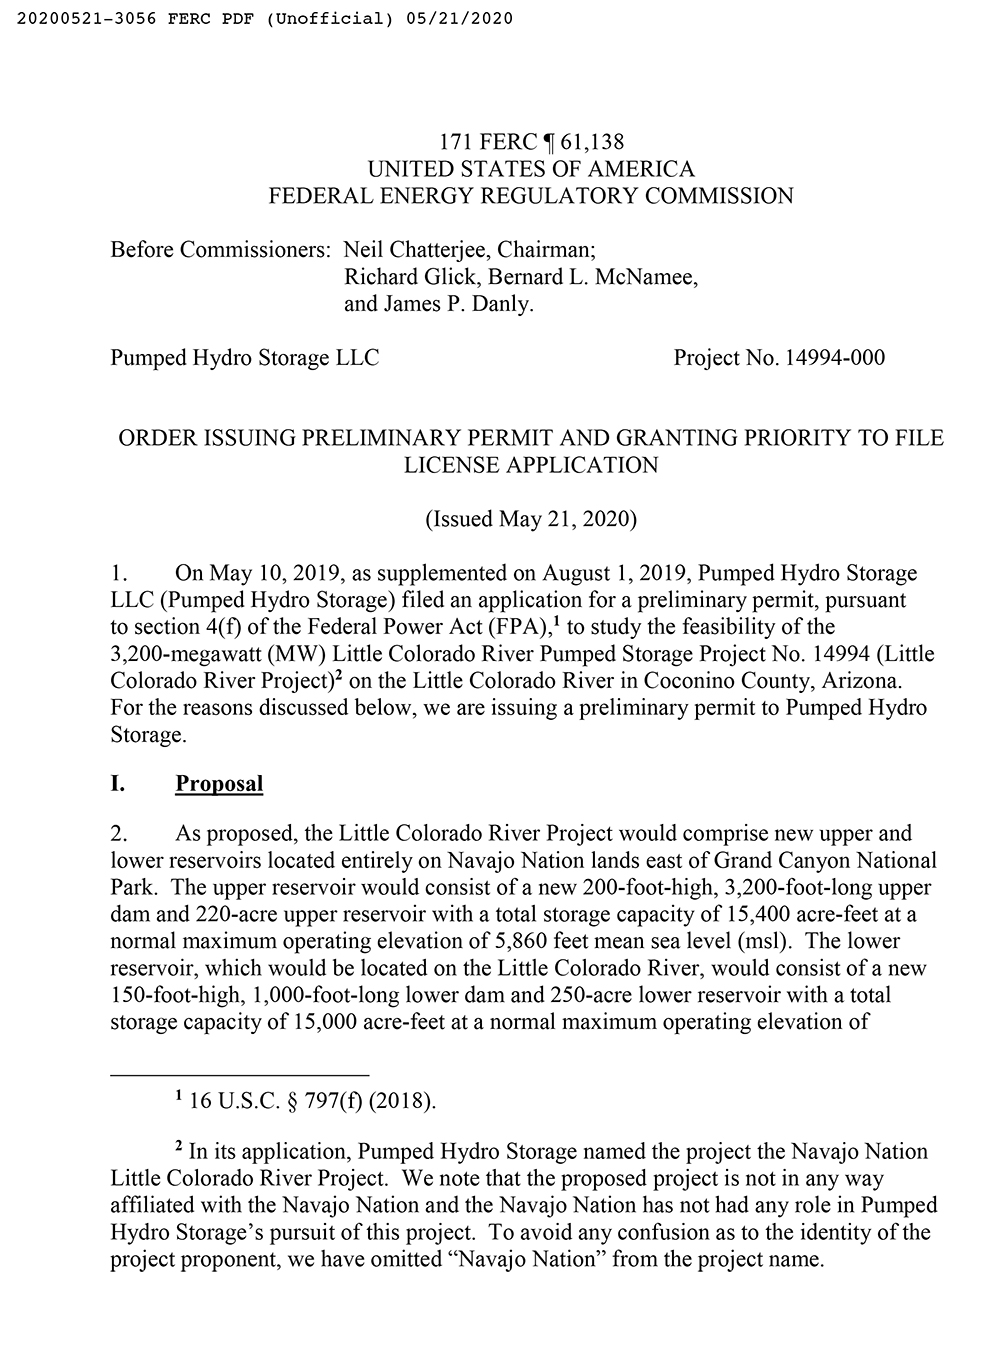 Page 1 of the FERC order